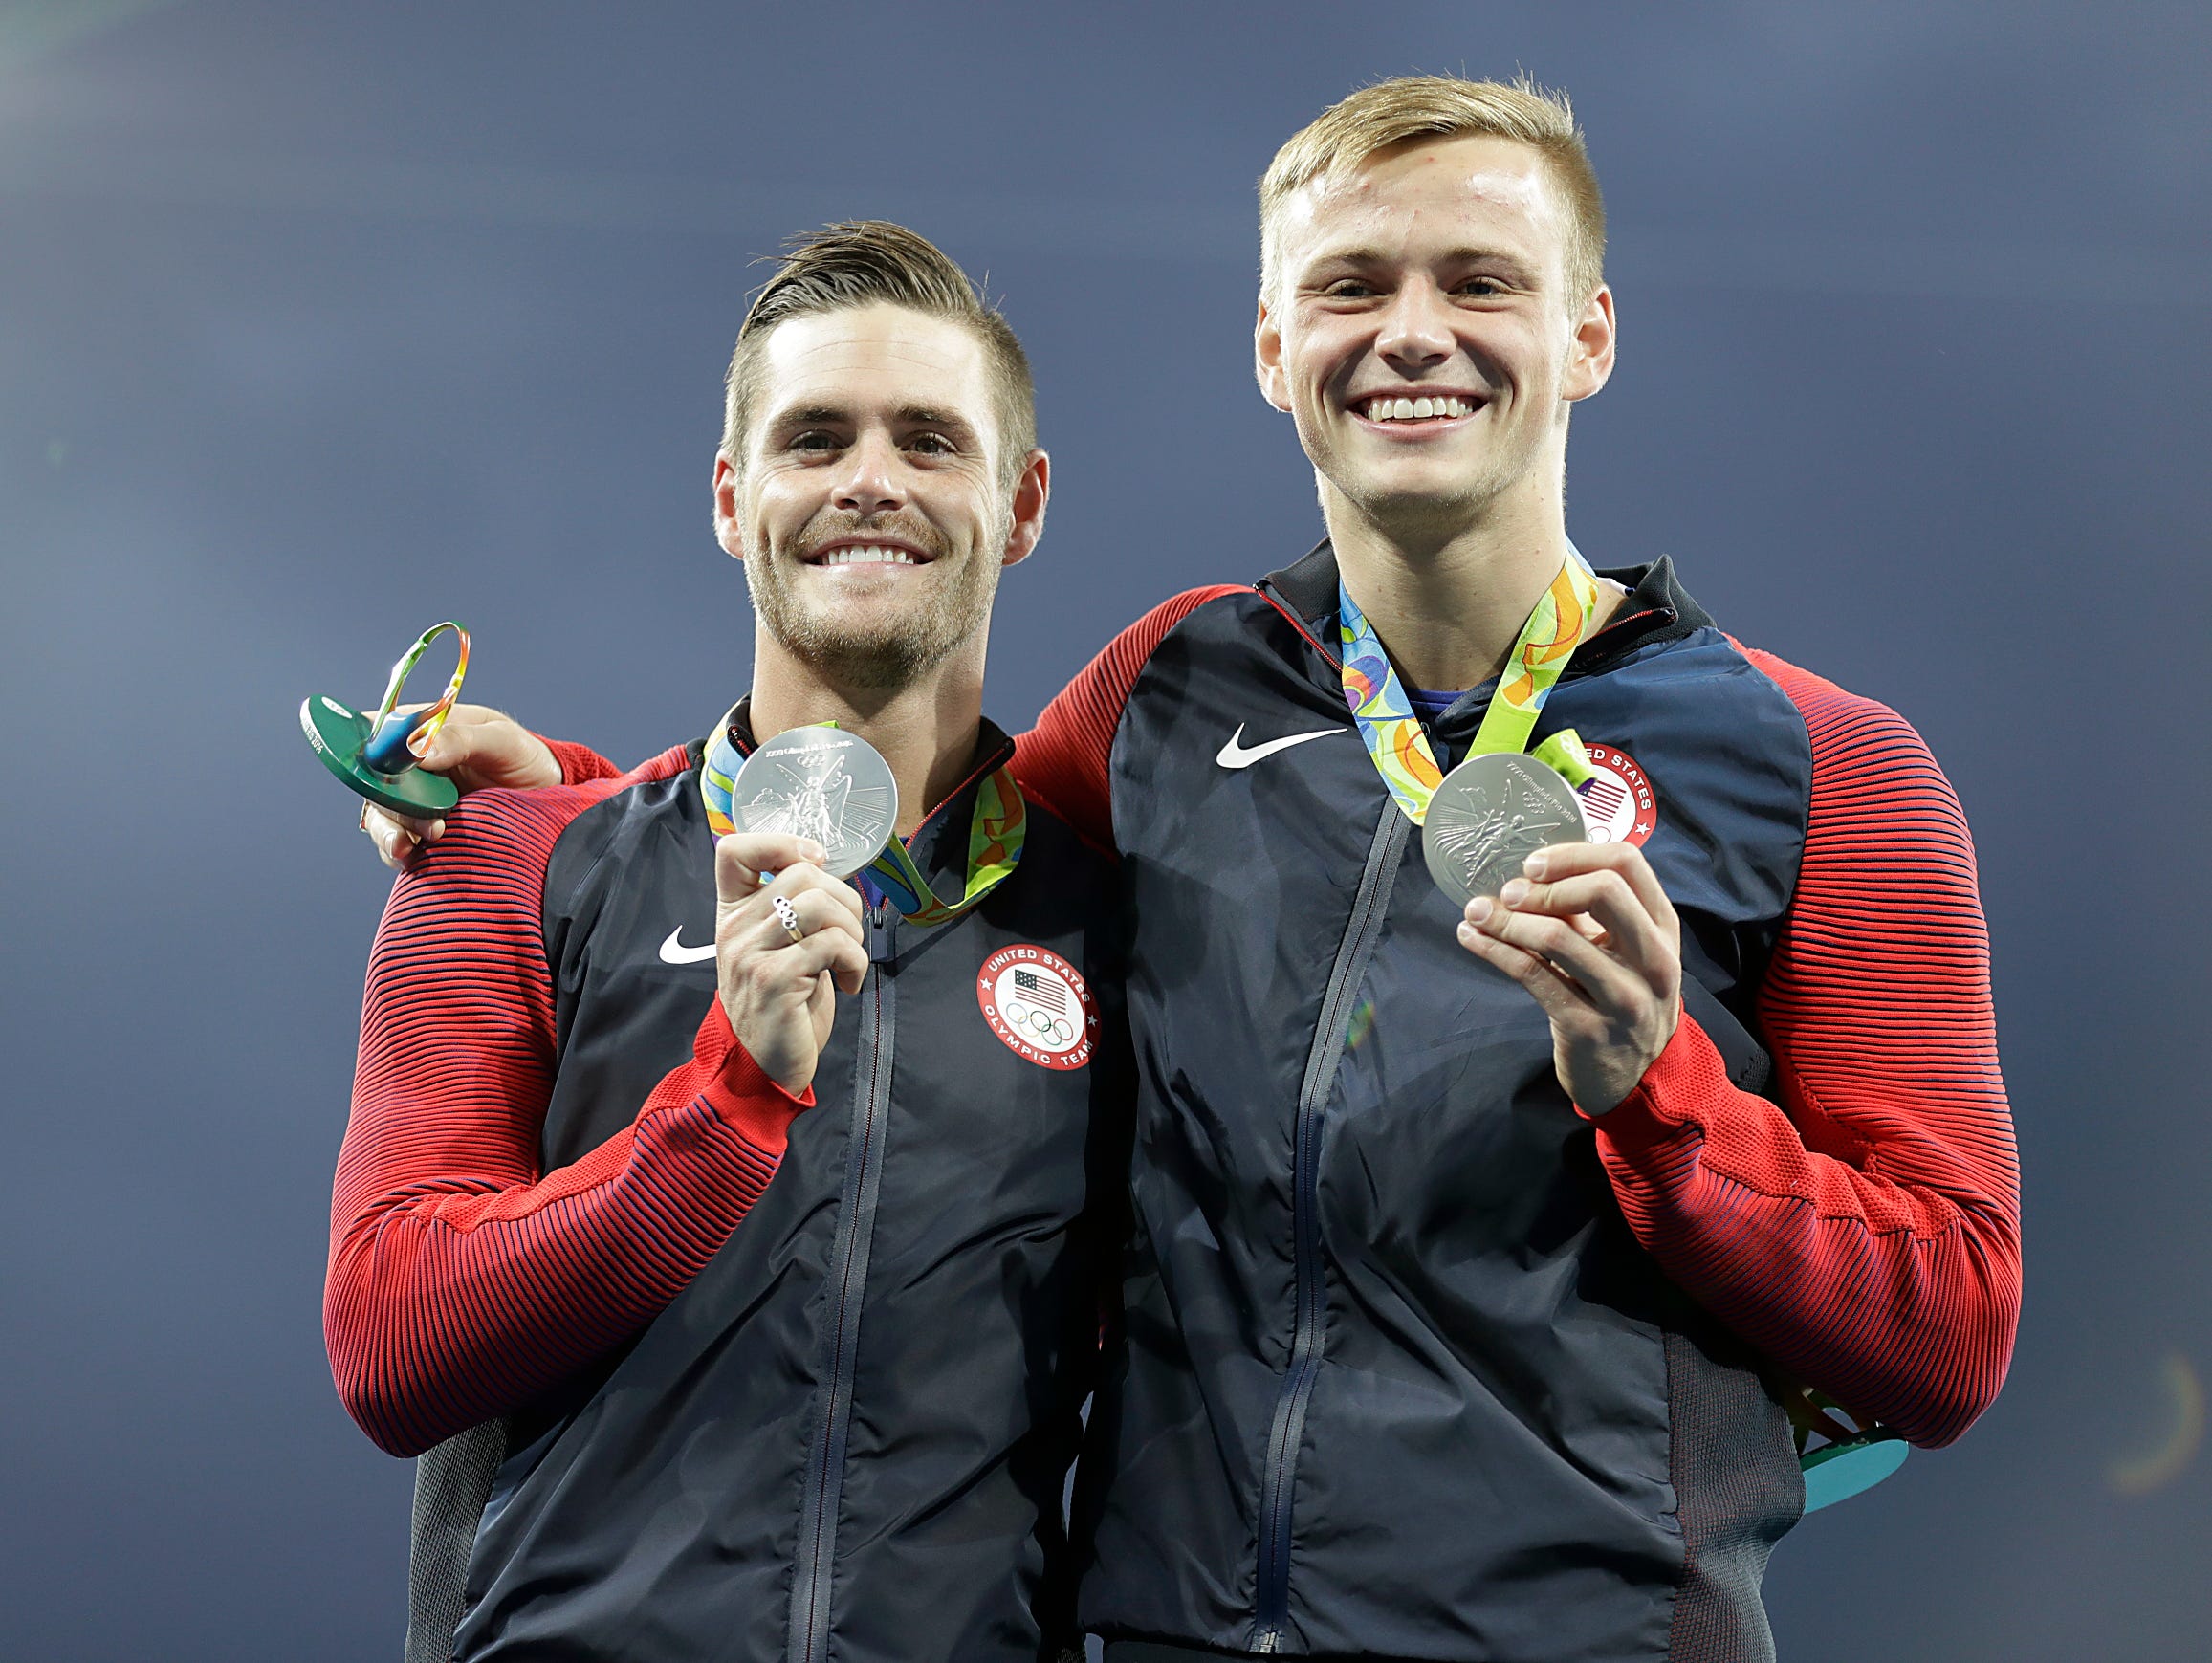 United States' silver medalists Steele Johnson, right, and David Boudia, left, pose with their medals after the men's synchronized 10-meter platform diving final in the Maria Lenk Aquatic Center at the 2016 Summer Olympics in Rio de Janeiro.